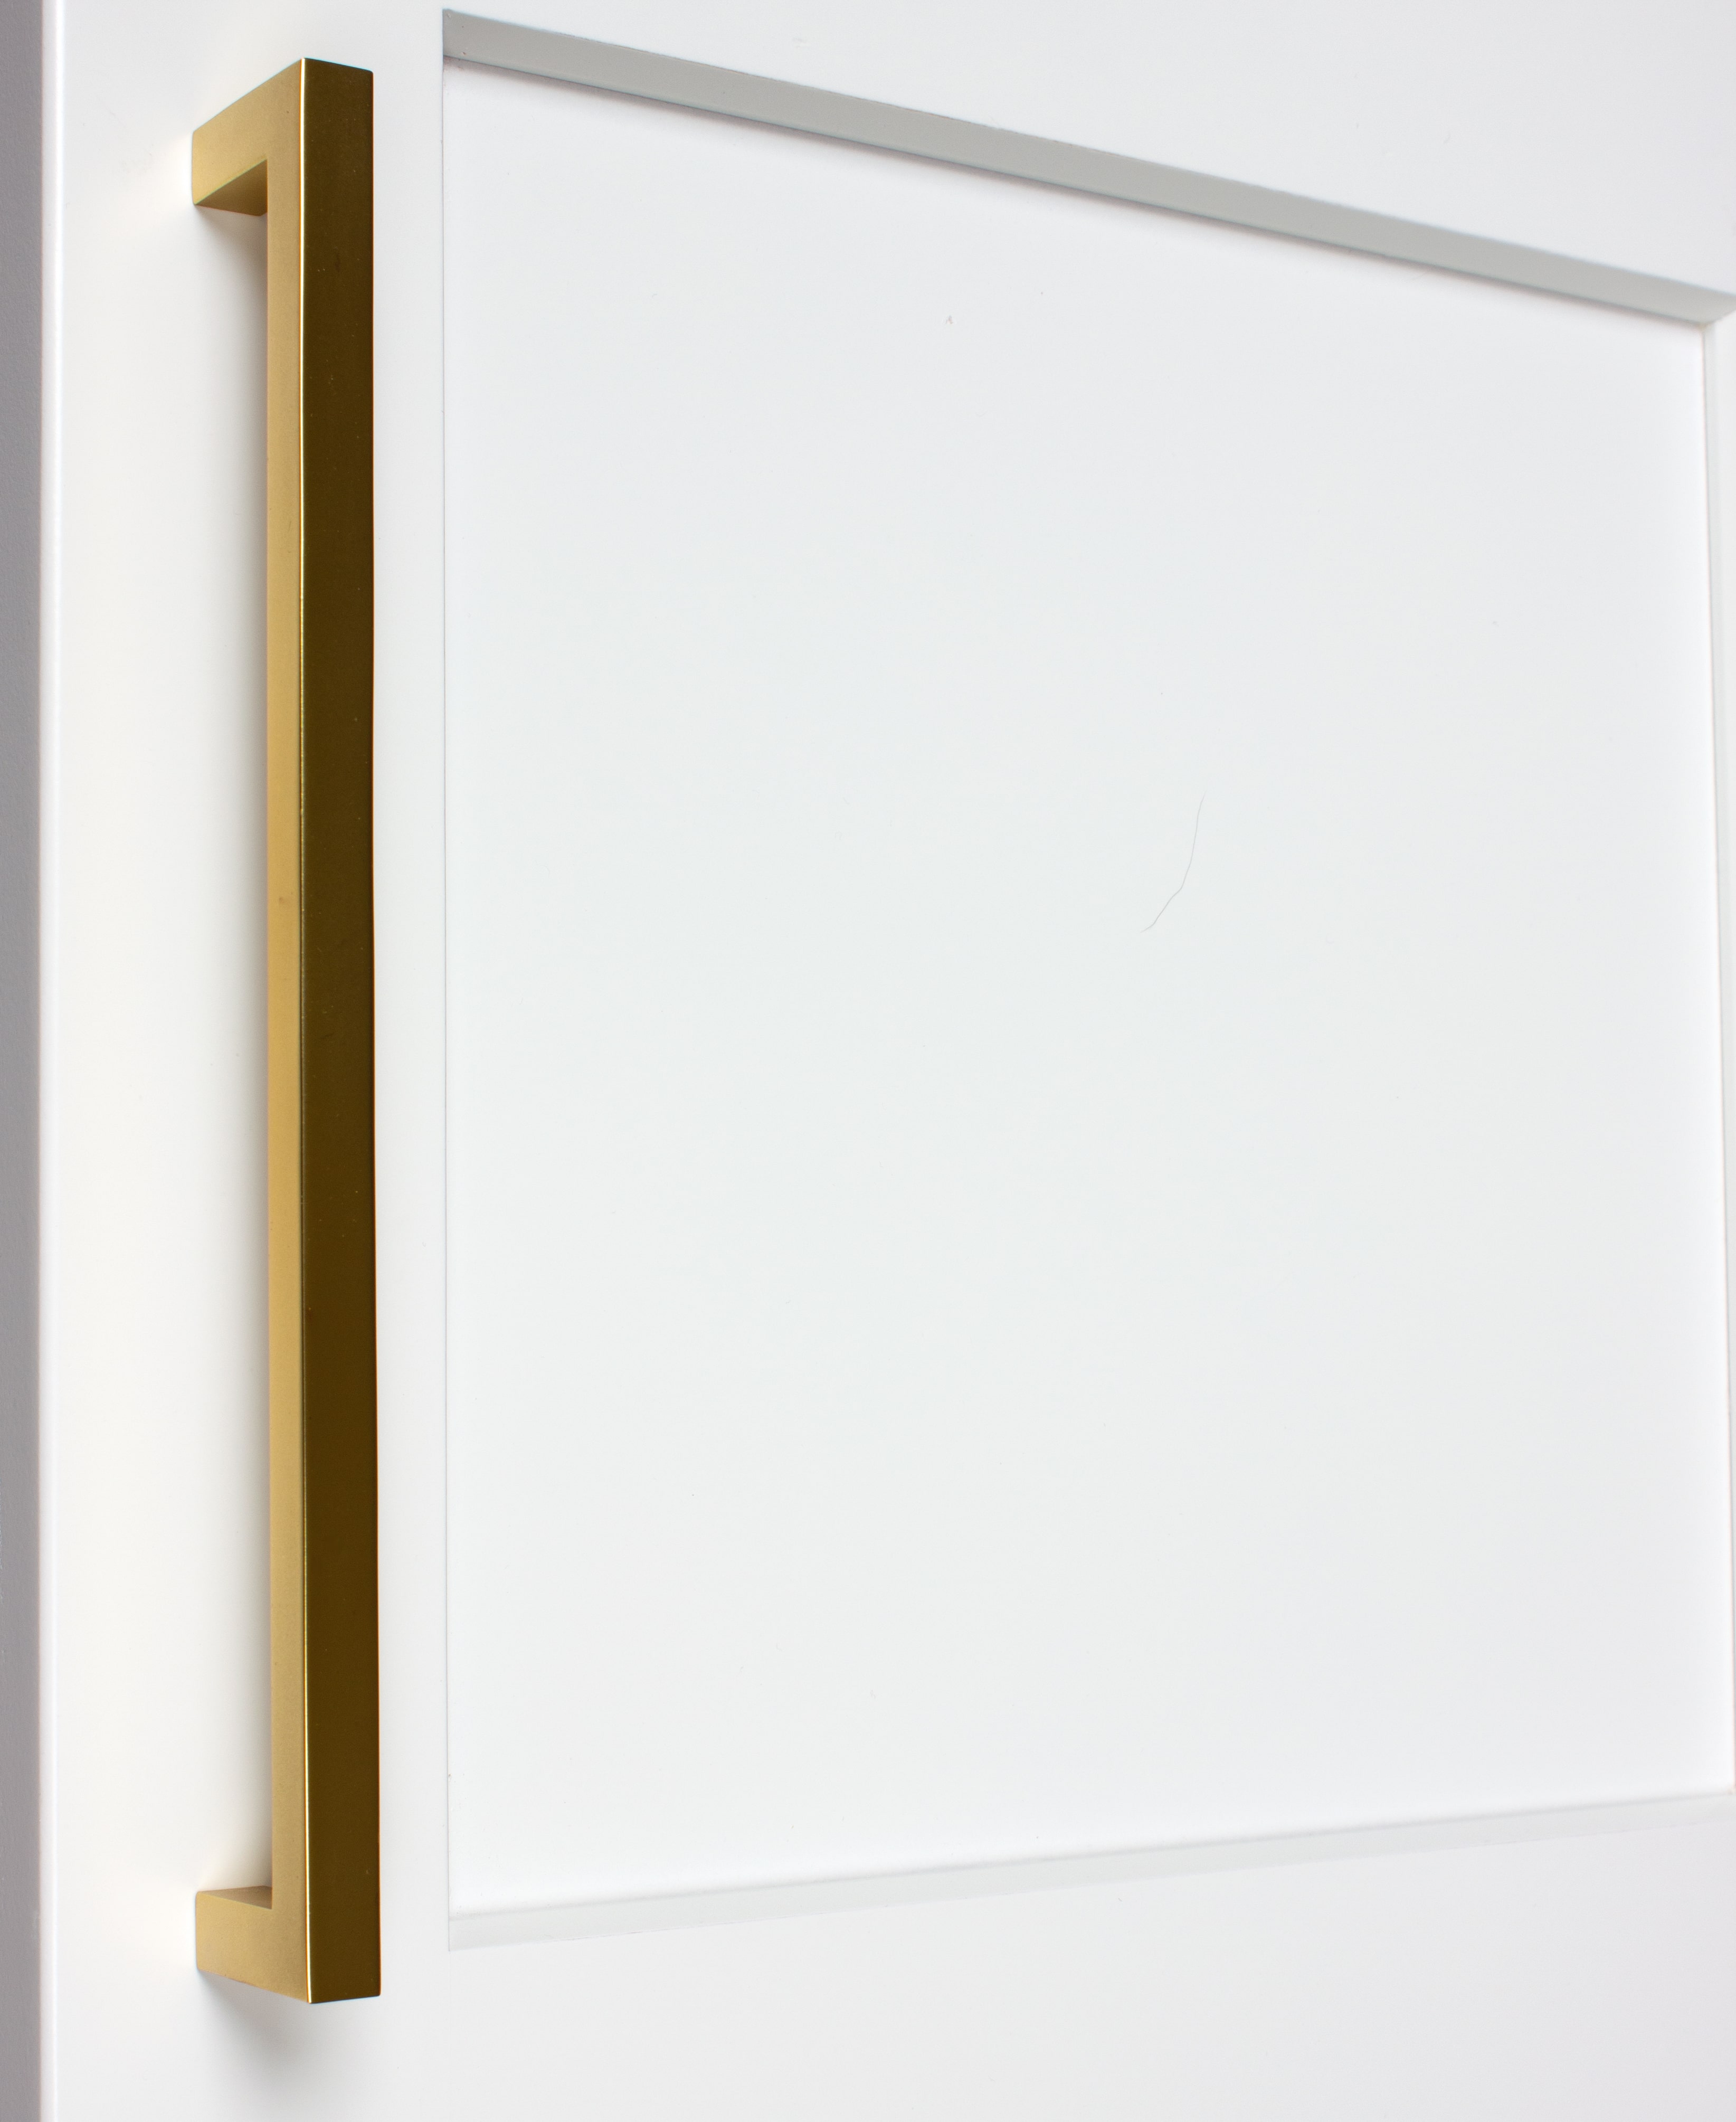 GlideRite 8-3/4 in. Center Solid Square Bar Cabinet Pulls, Brass Gold, Pack of 10 - image 2 of 3